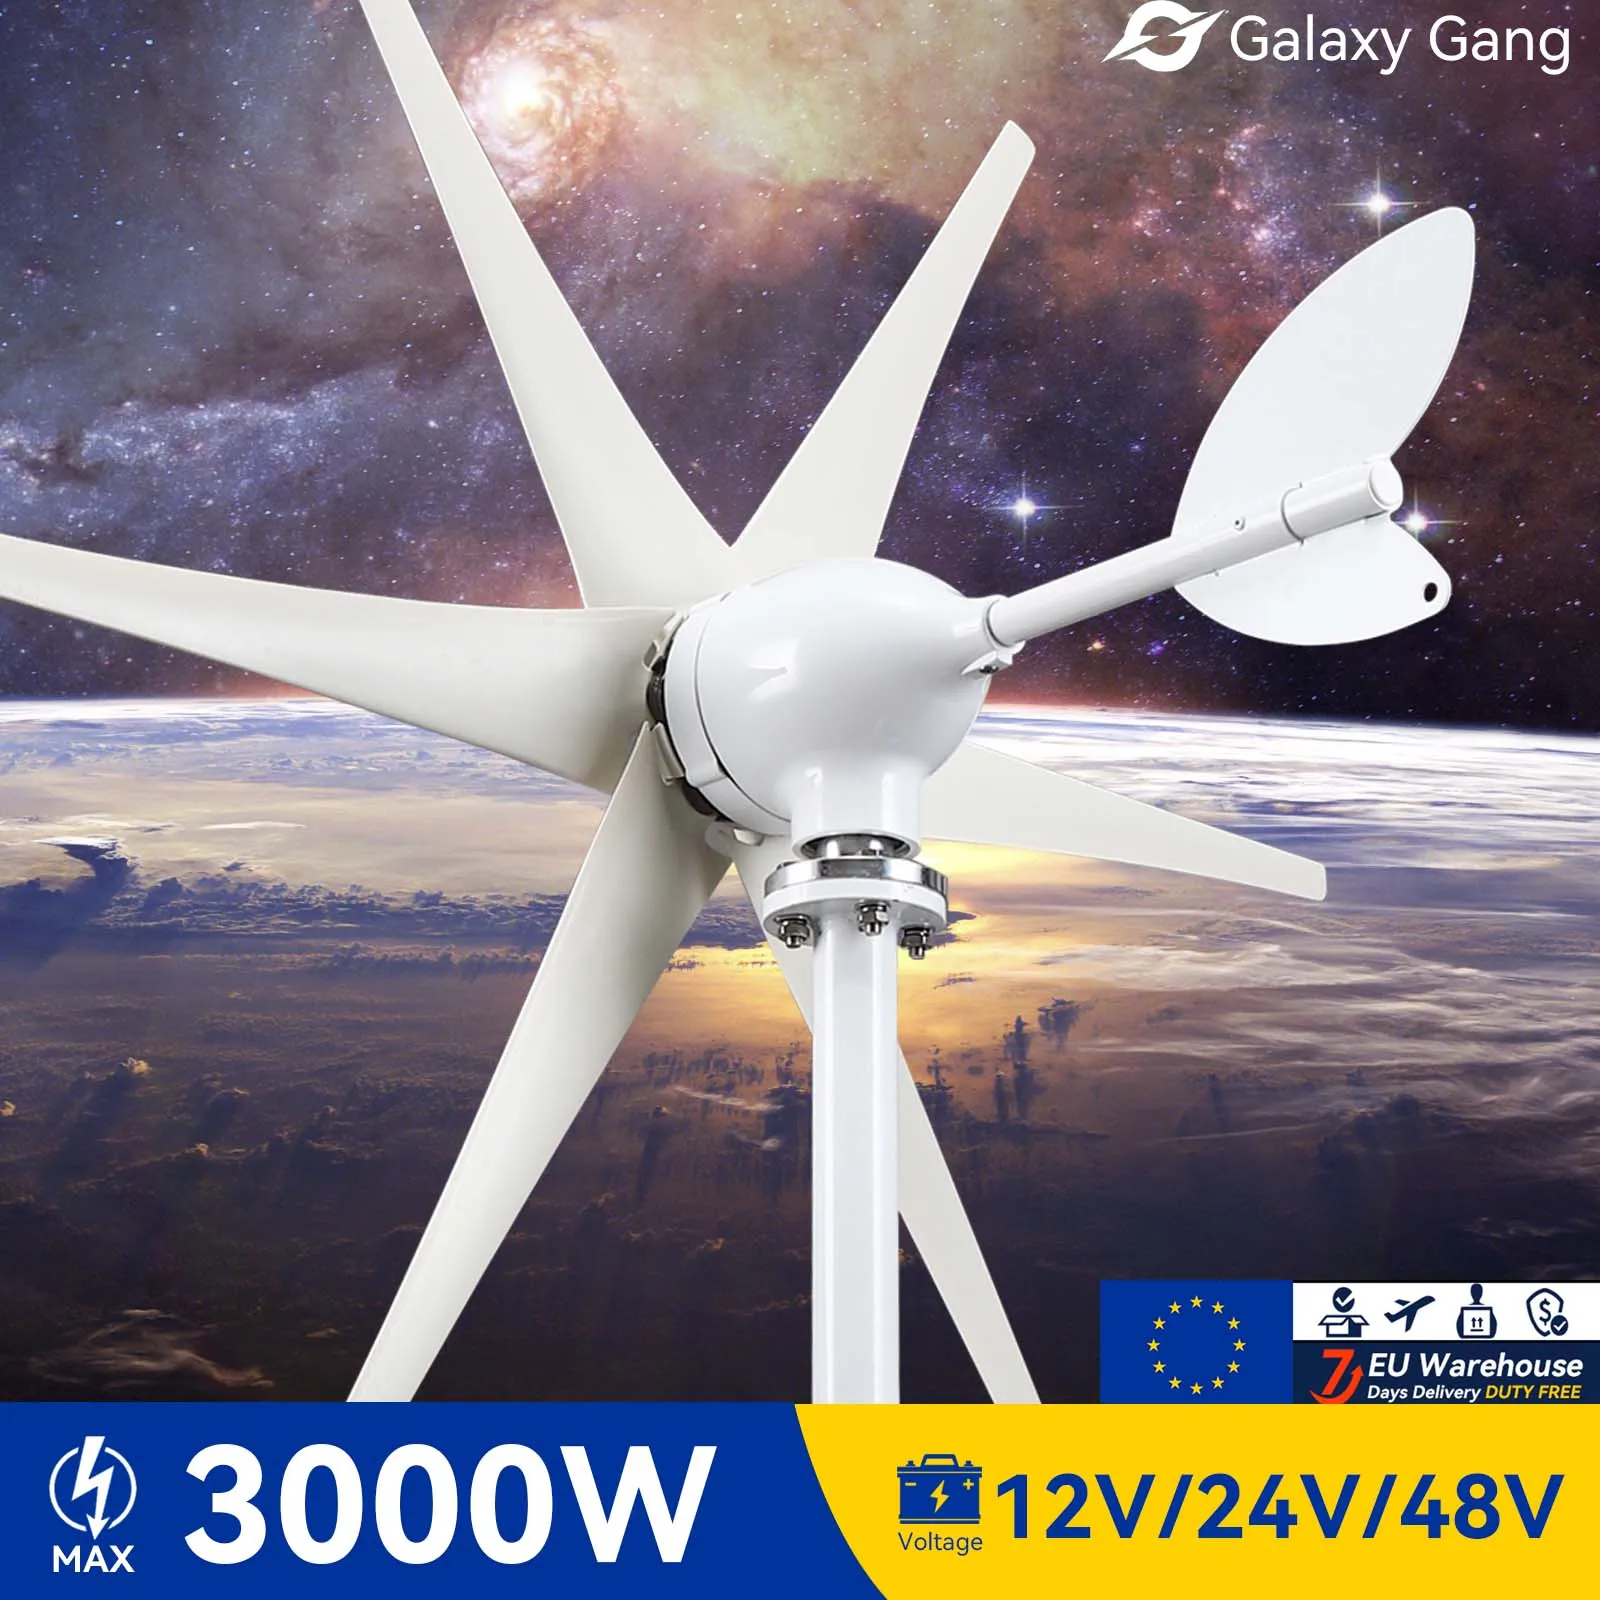 

Galaxy Gang 3000w Wind Electric Generator Turbine Kit 3KW Power 12v 24v 48v Off Grid System With Mppt Controller Model GGS7